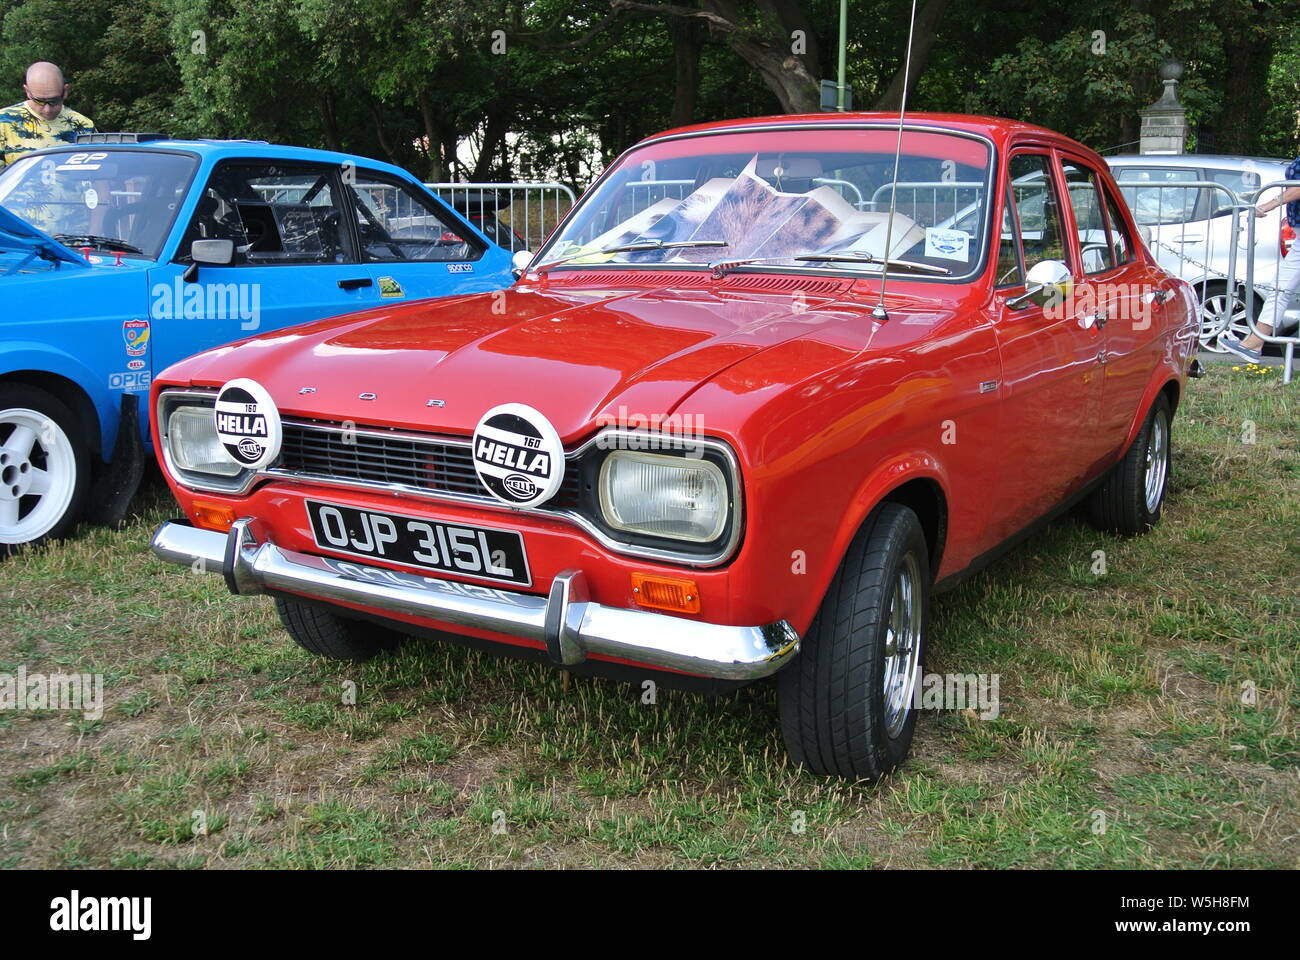 Mk1 Ford Escort parked on display at the Riviera classic car show, Paignton, Devon, England, UK. Stock Photo